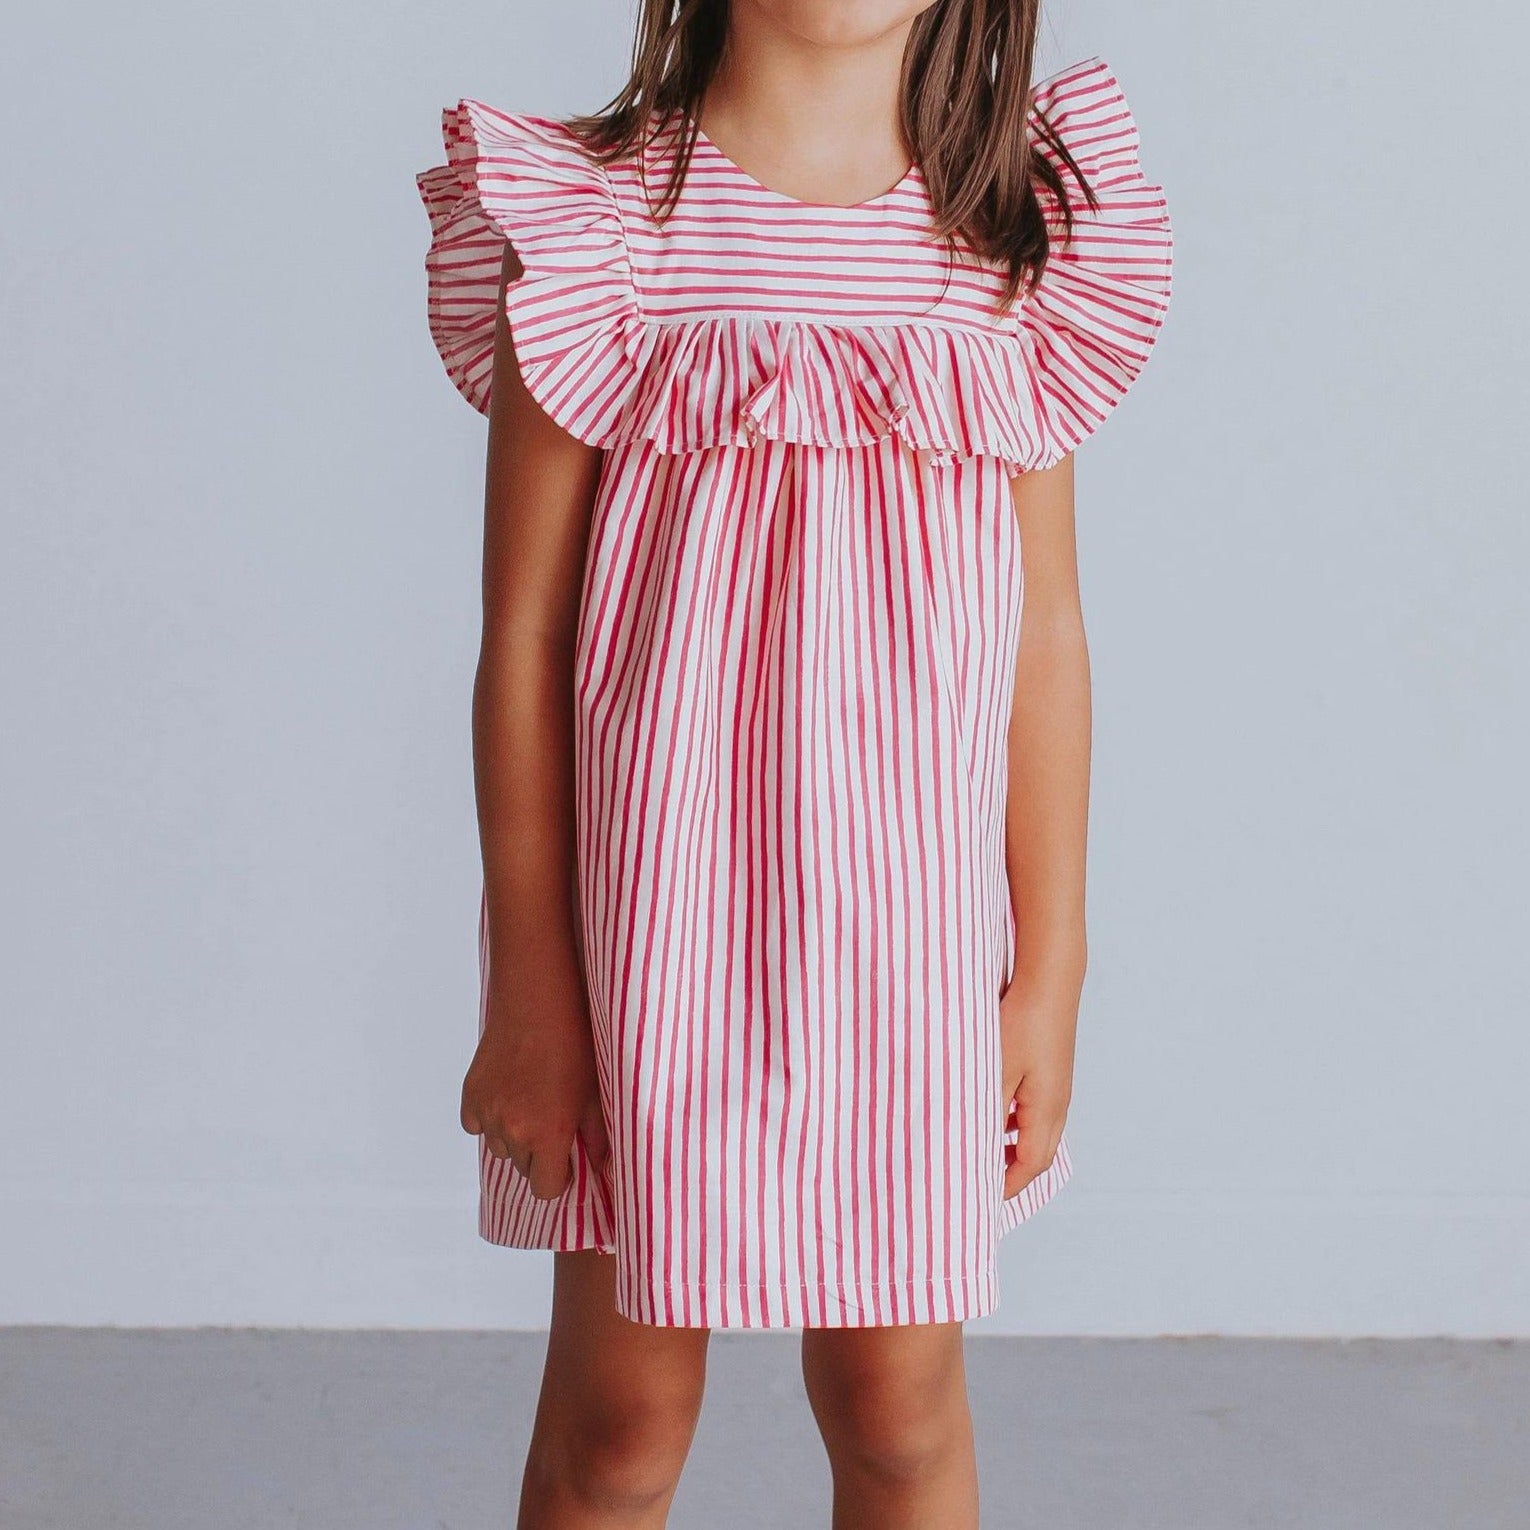 Red and White Striped Dress Outfit - Doused in Pink